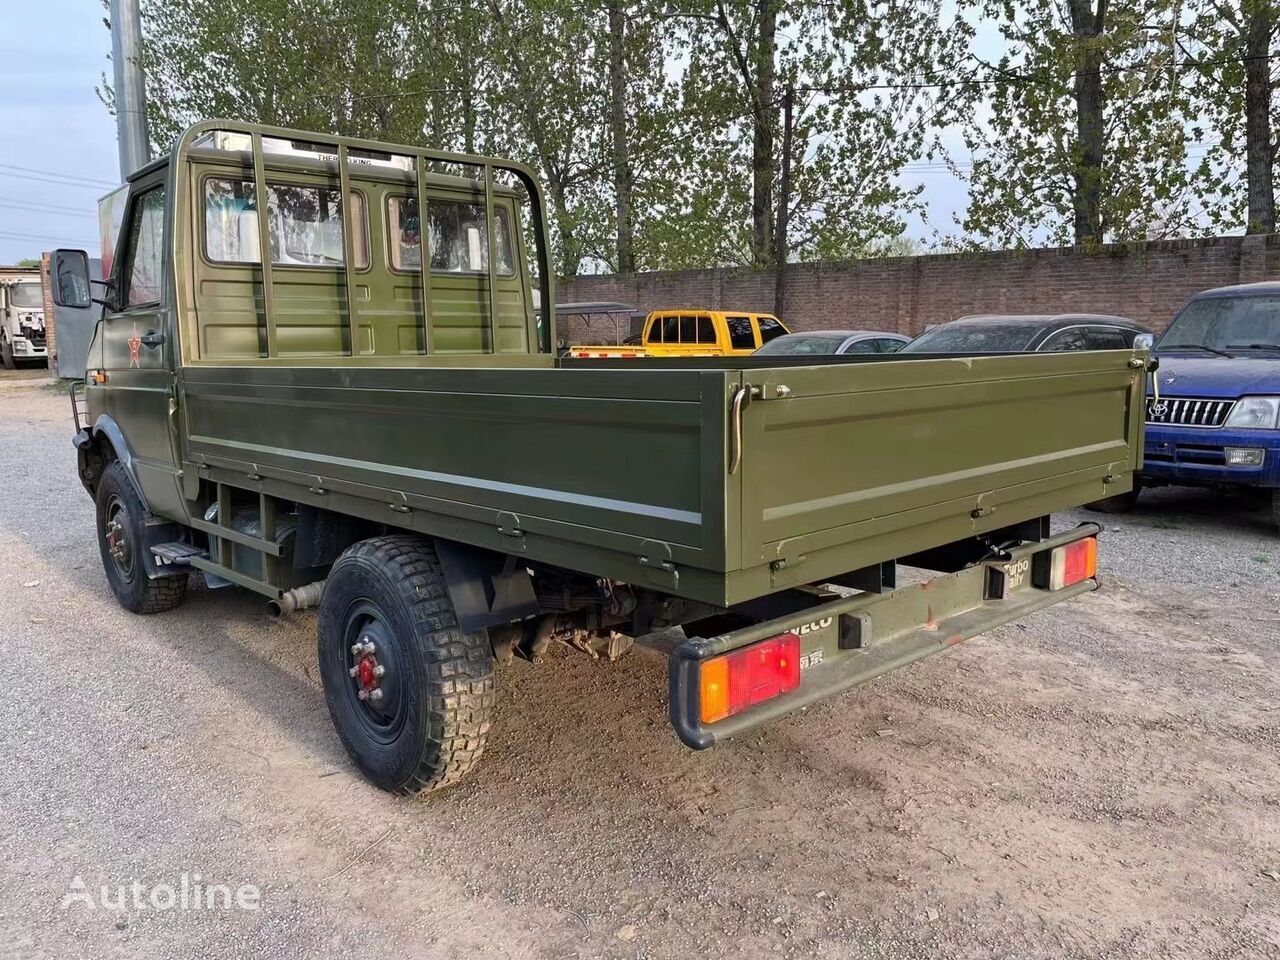 Fourgon plateau IVECO 4x4 all wheels drive light cargo truck military chassis: photos 4